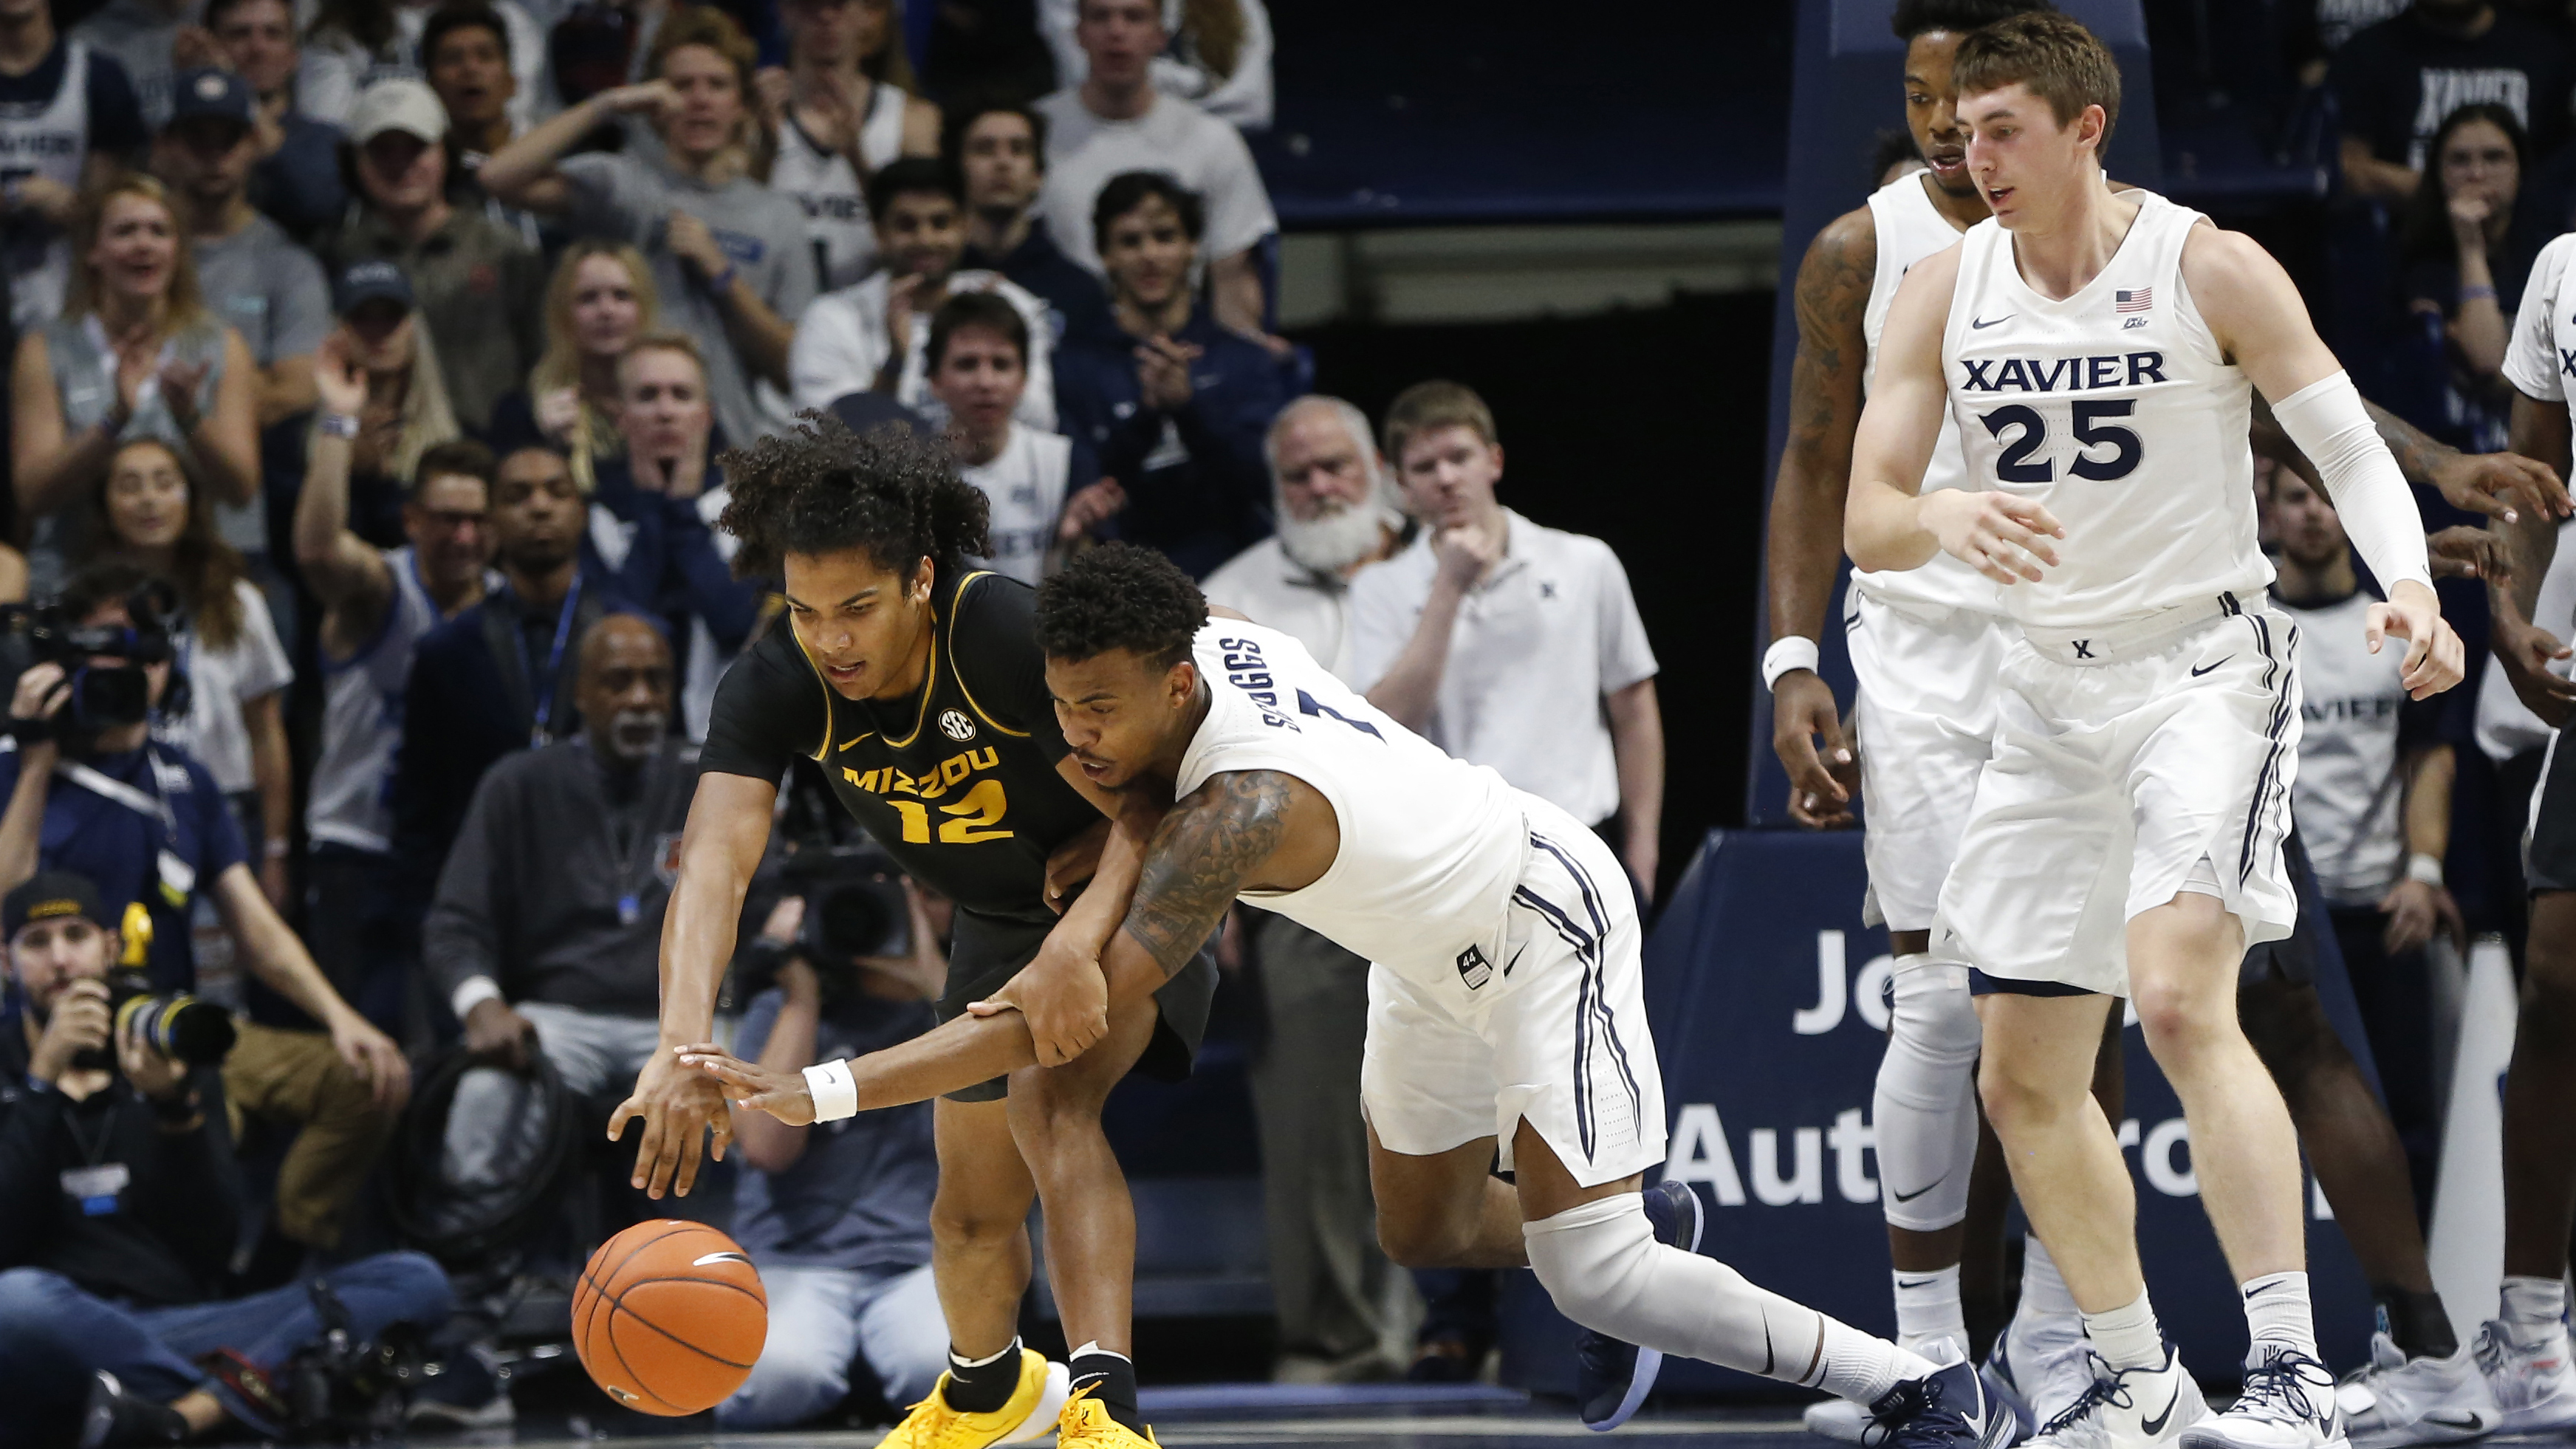 Missouri suffers first loss of season, 63-58 to Xavier in overtime